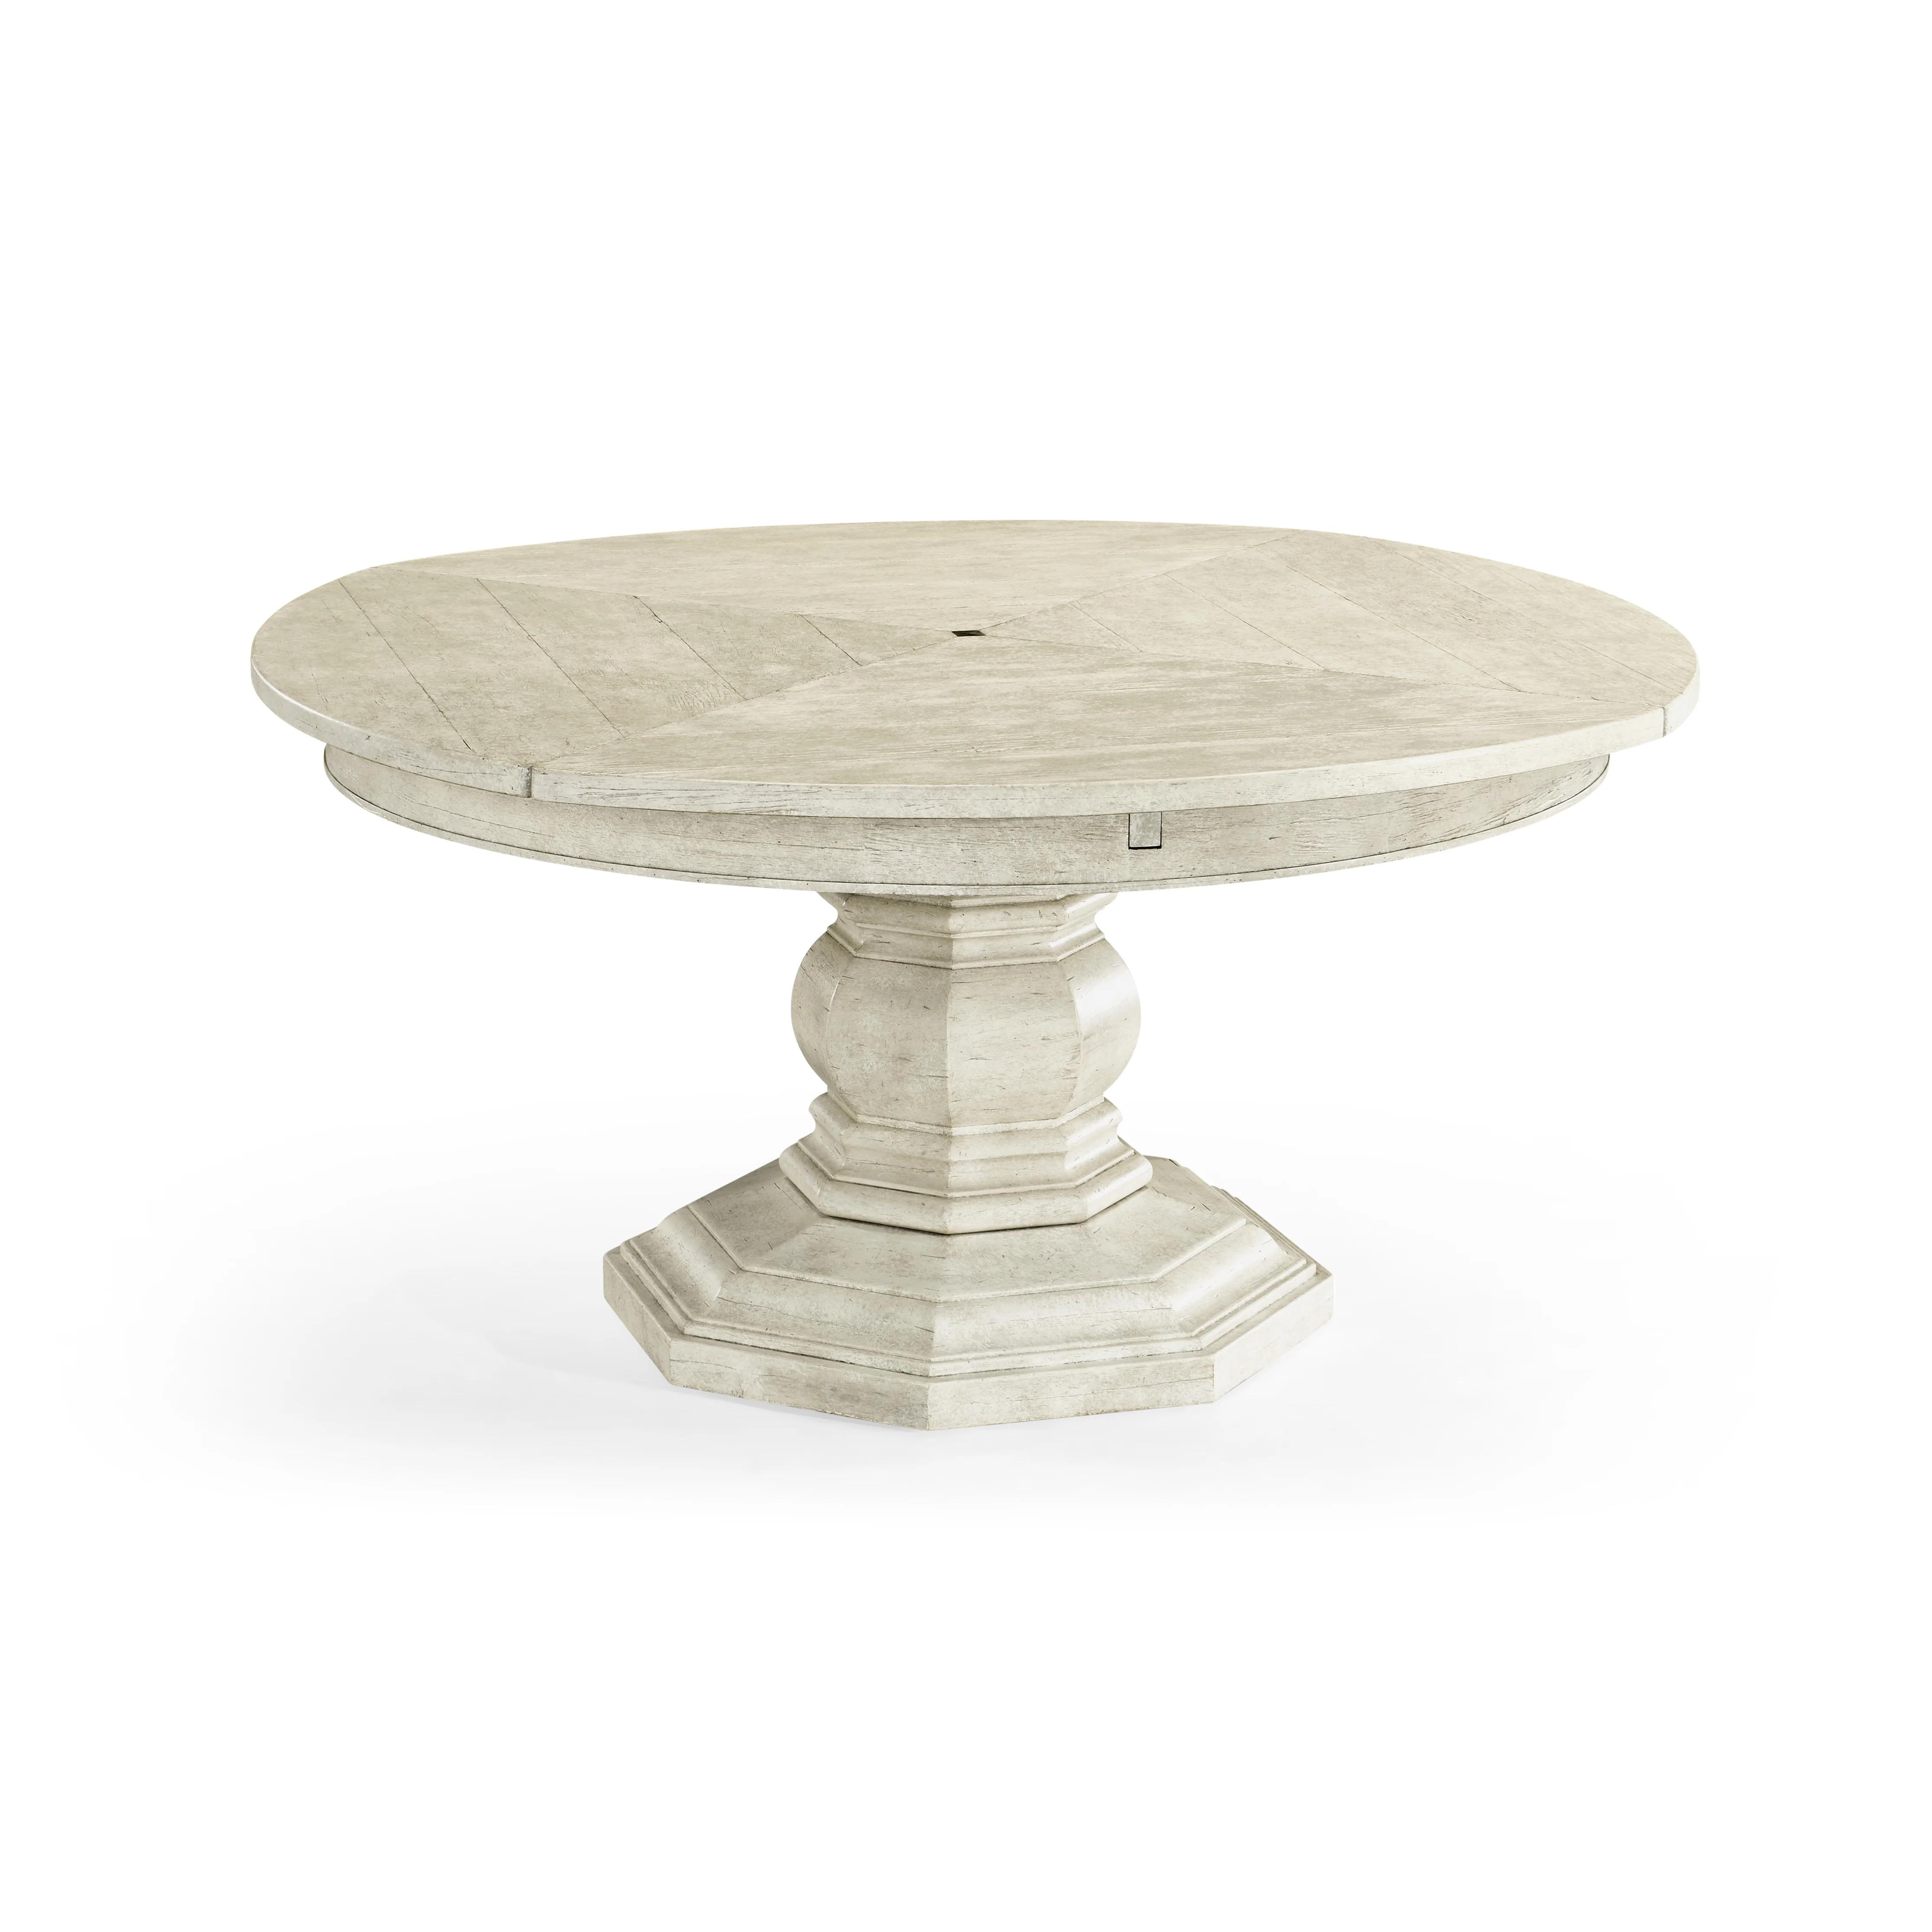 Casual Dining Table Jonathan Charles Octagonal Centre Table Rustic in Rustic Grey 491130-59D-DTW-AH in Gray 